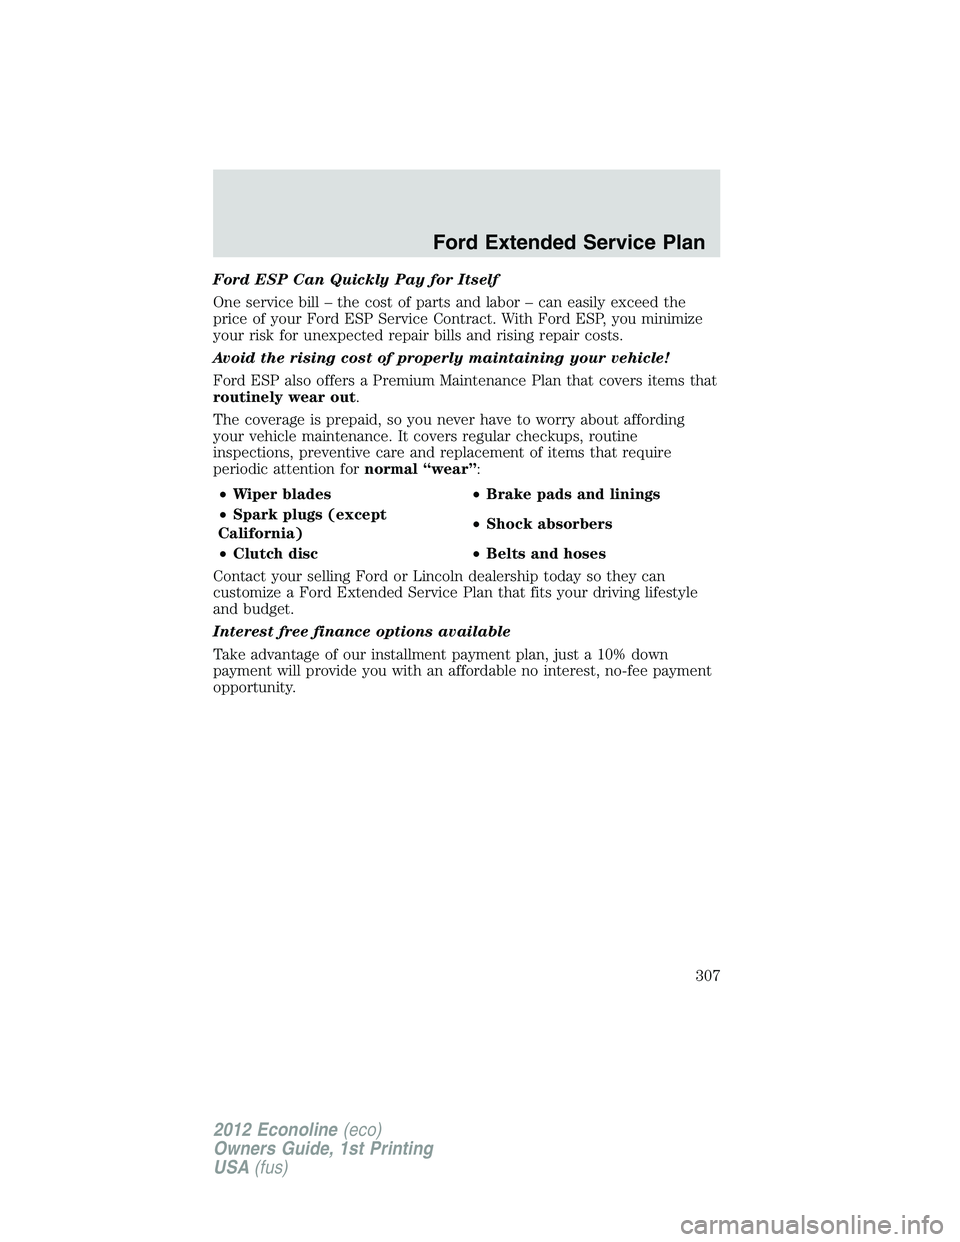 FORD E450 2012  Owners Manual Ford ESP Can Quickly Pay for Itself
One service bill – the cost of parts and labor – can easily exceed the
price of your Ford ESP Service Contract. With Ford ESP, you minimize
your risk for unexpe